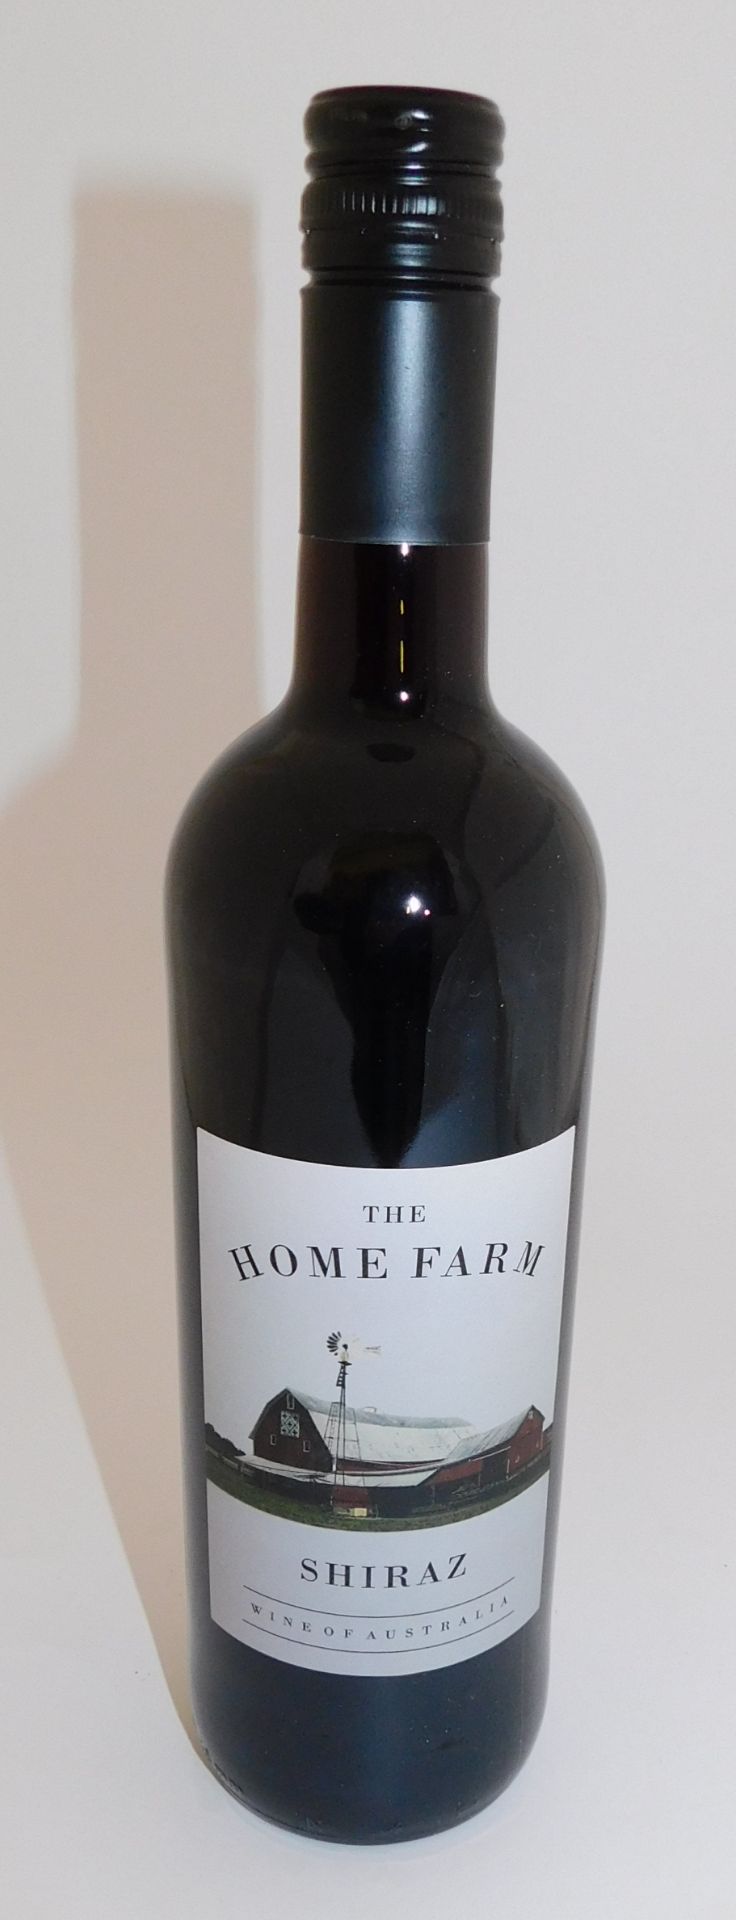 24 Bottles of Home Farm Shiraz, 75cl (Located Stockport – See General Notes for More Details)